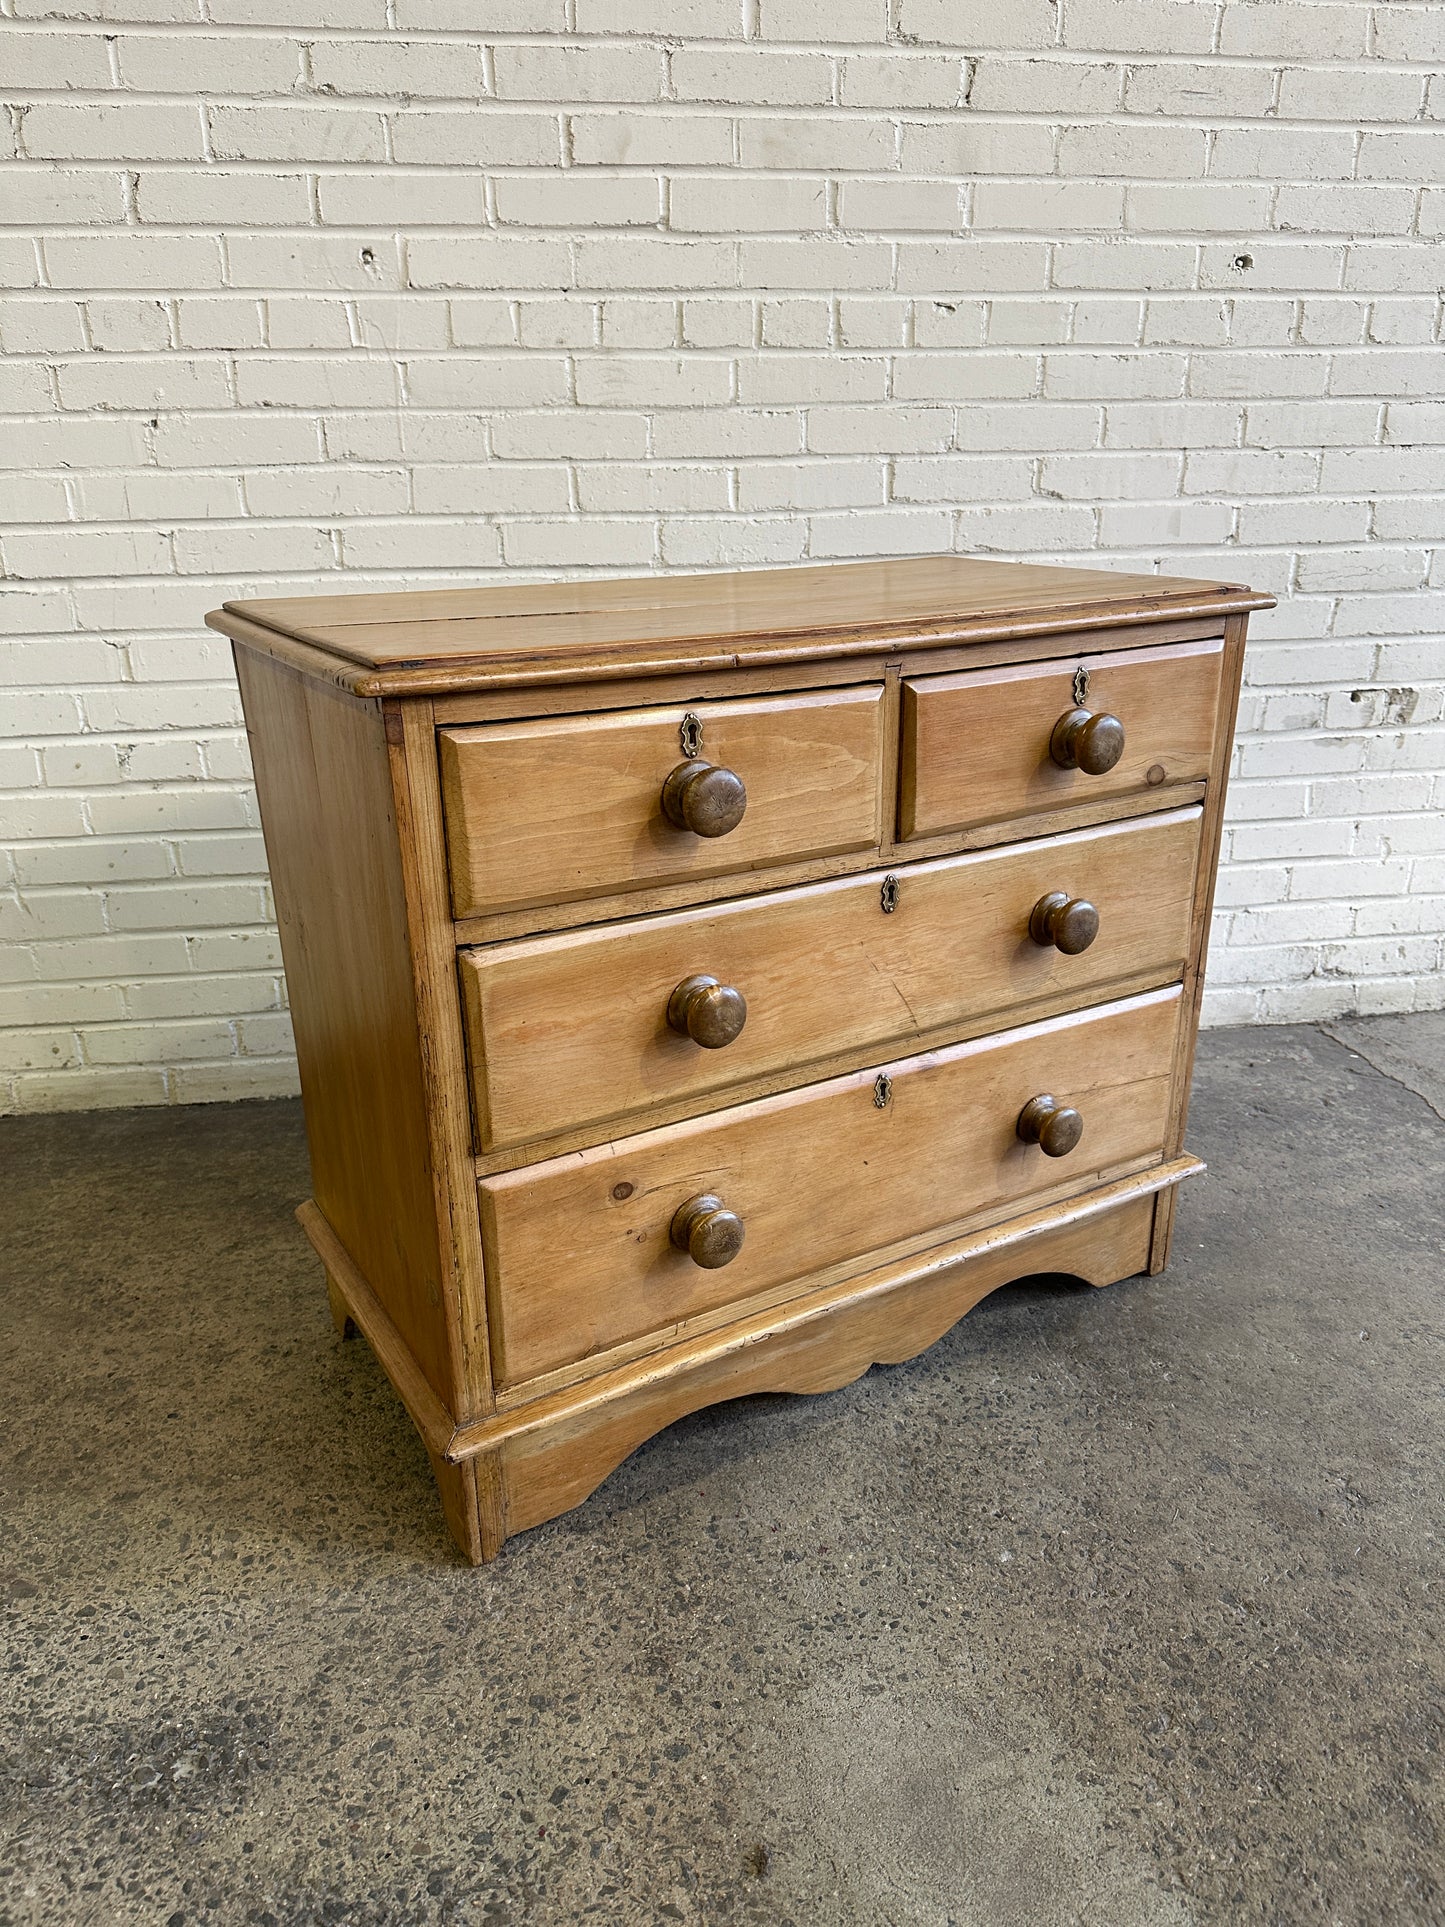 Antique Pine Chest of Drawers with Wavy Skirt, c. 1890